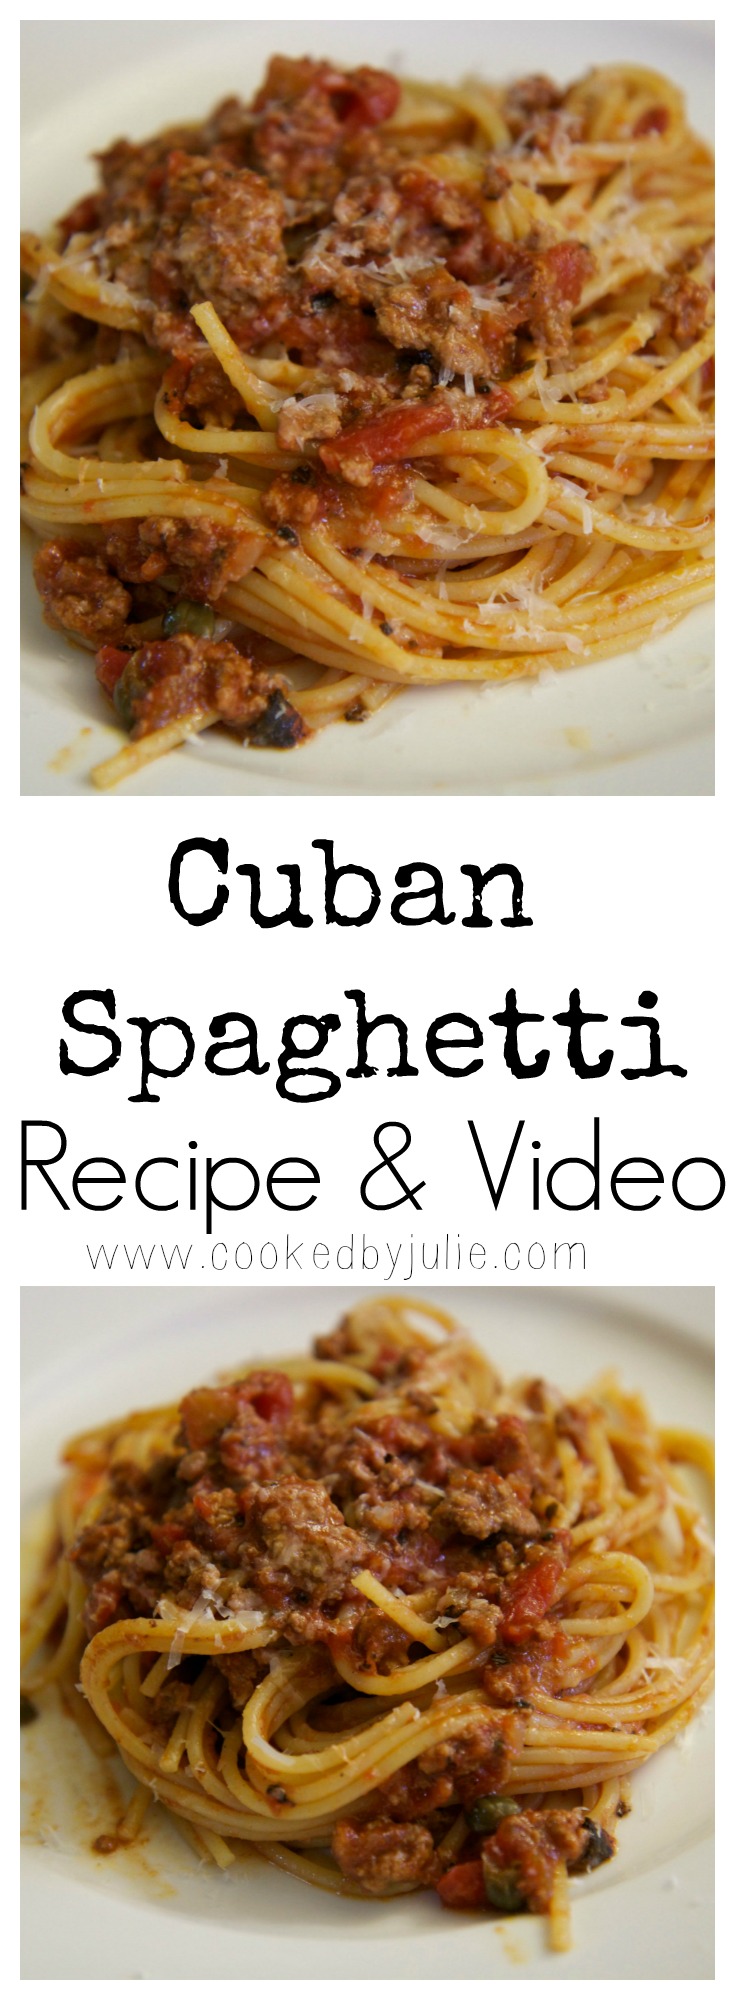 Try this Cuban Spaghetti recipe from CookedbyJulie.com